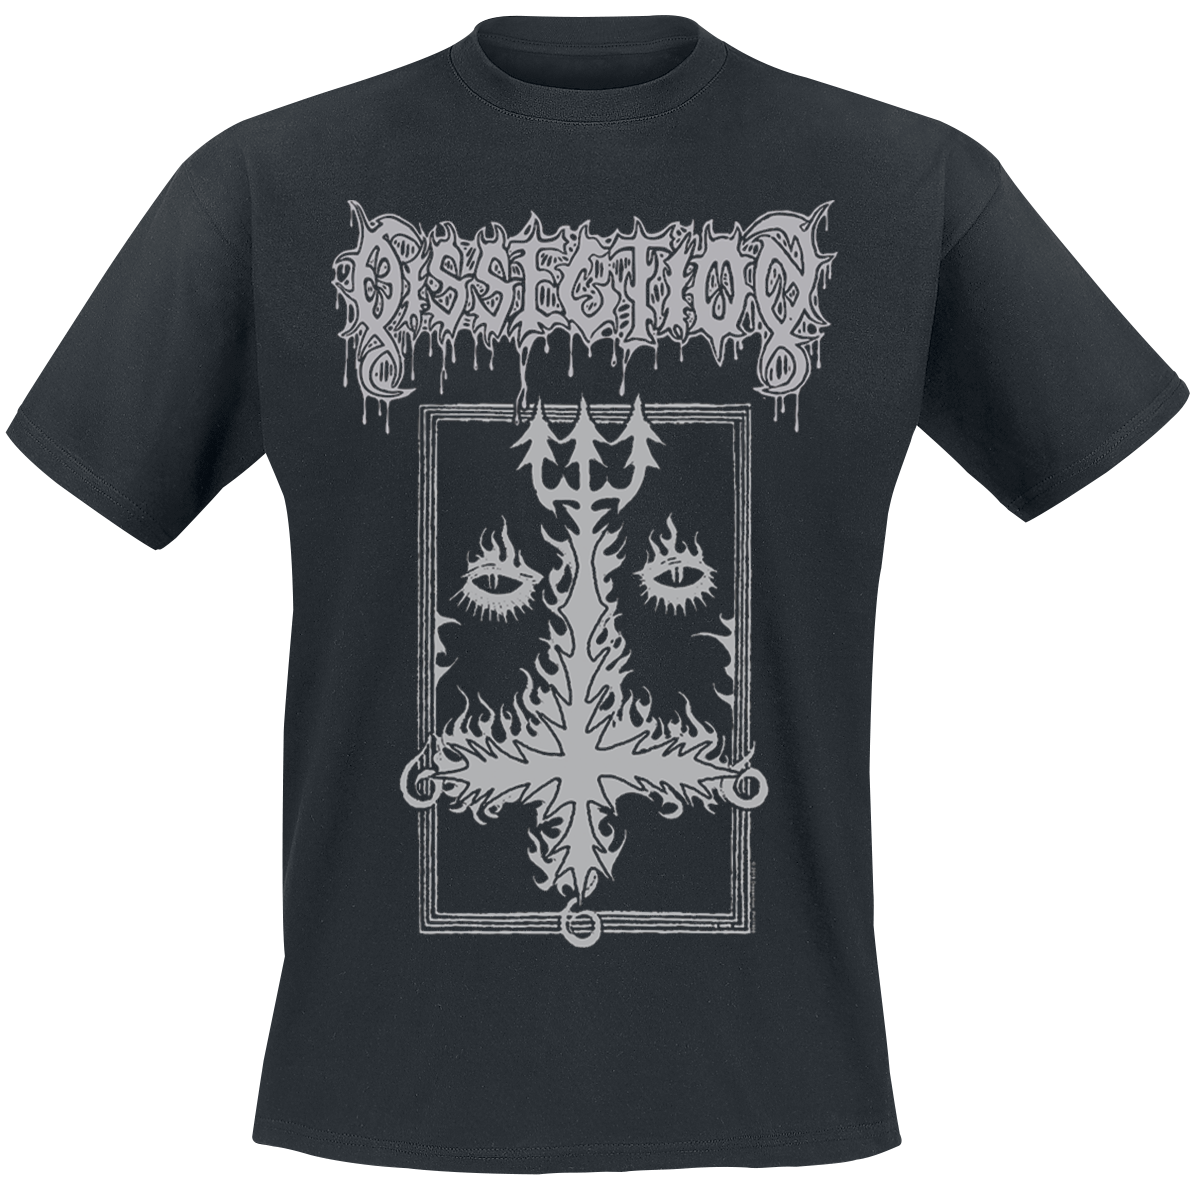 Dissection - The past is alive - T-Shirt - black image